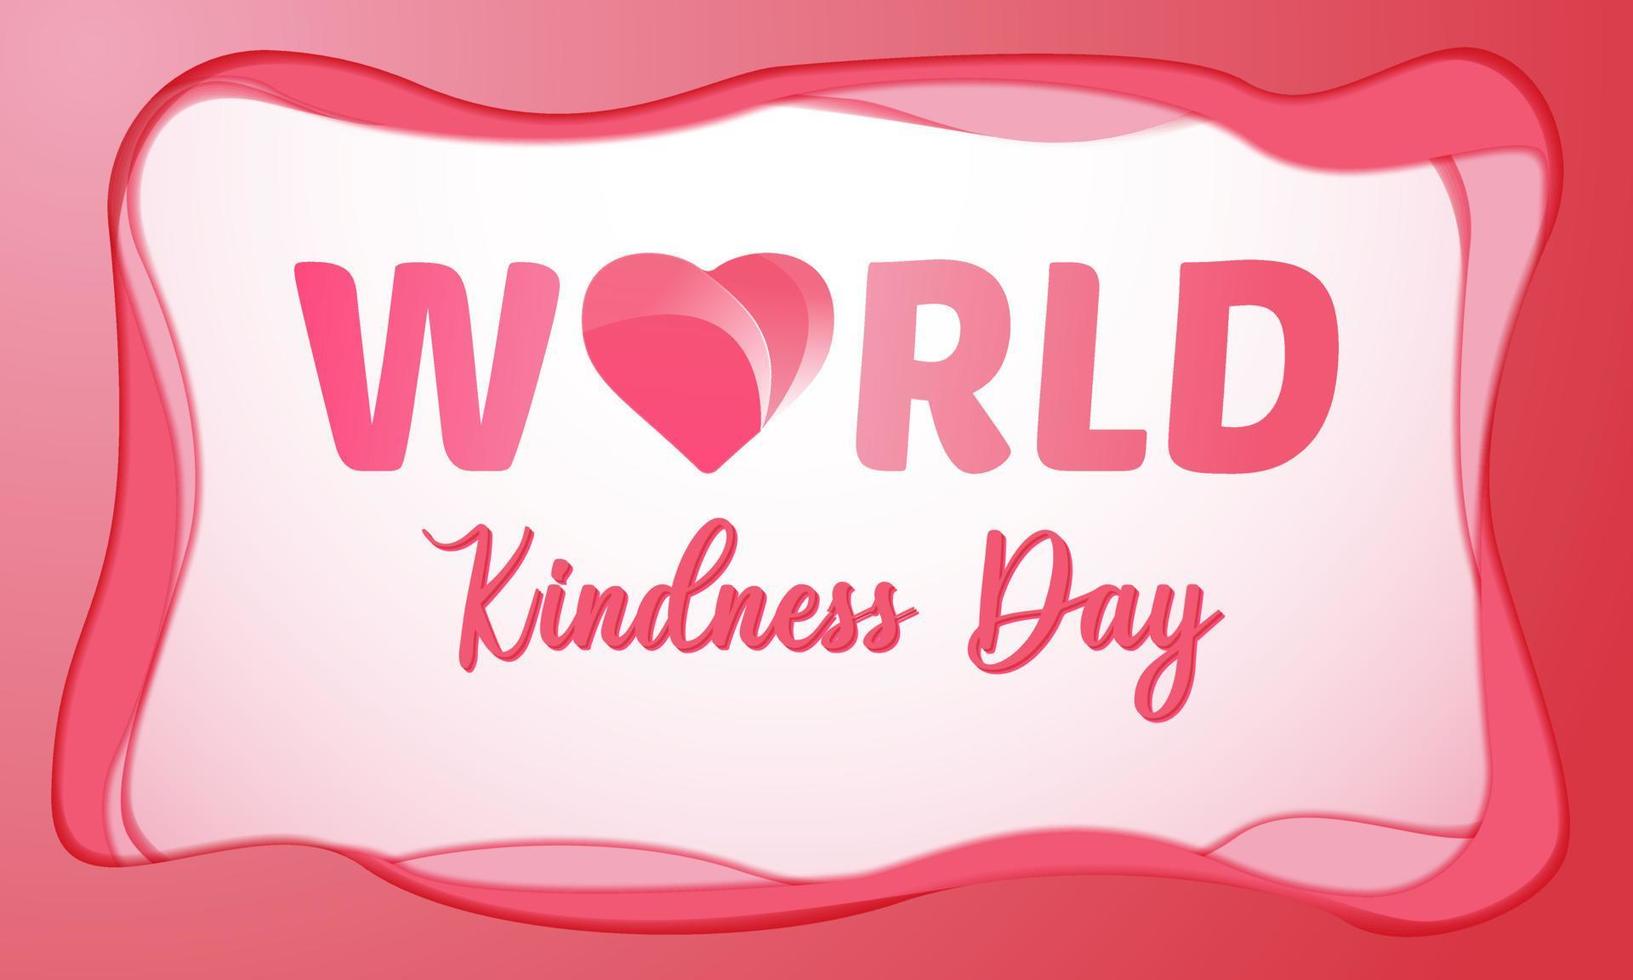 World Kindness Day Background. November 13. Premium and luxury greeting cards, letters, posters, or banners. With gradient love, heart icon symbol. vector